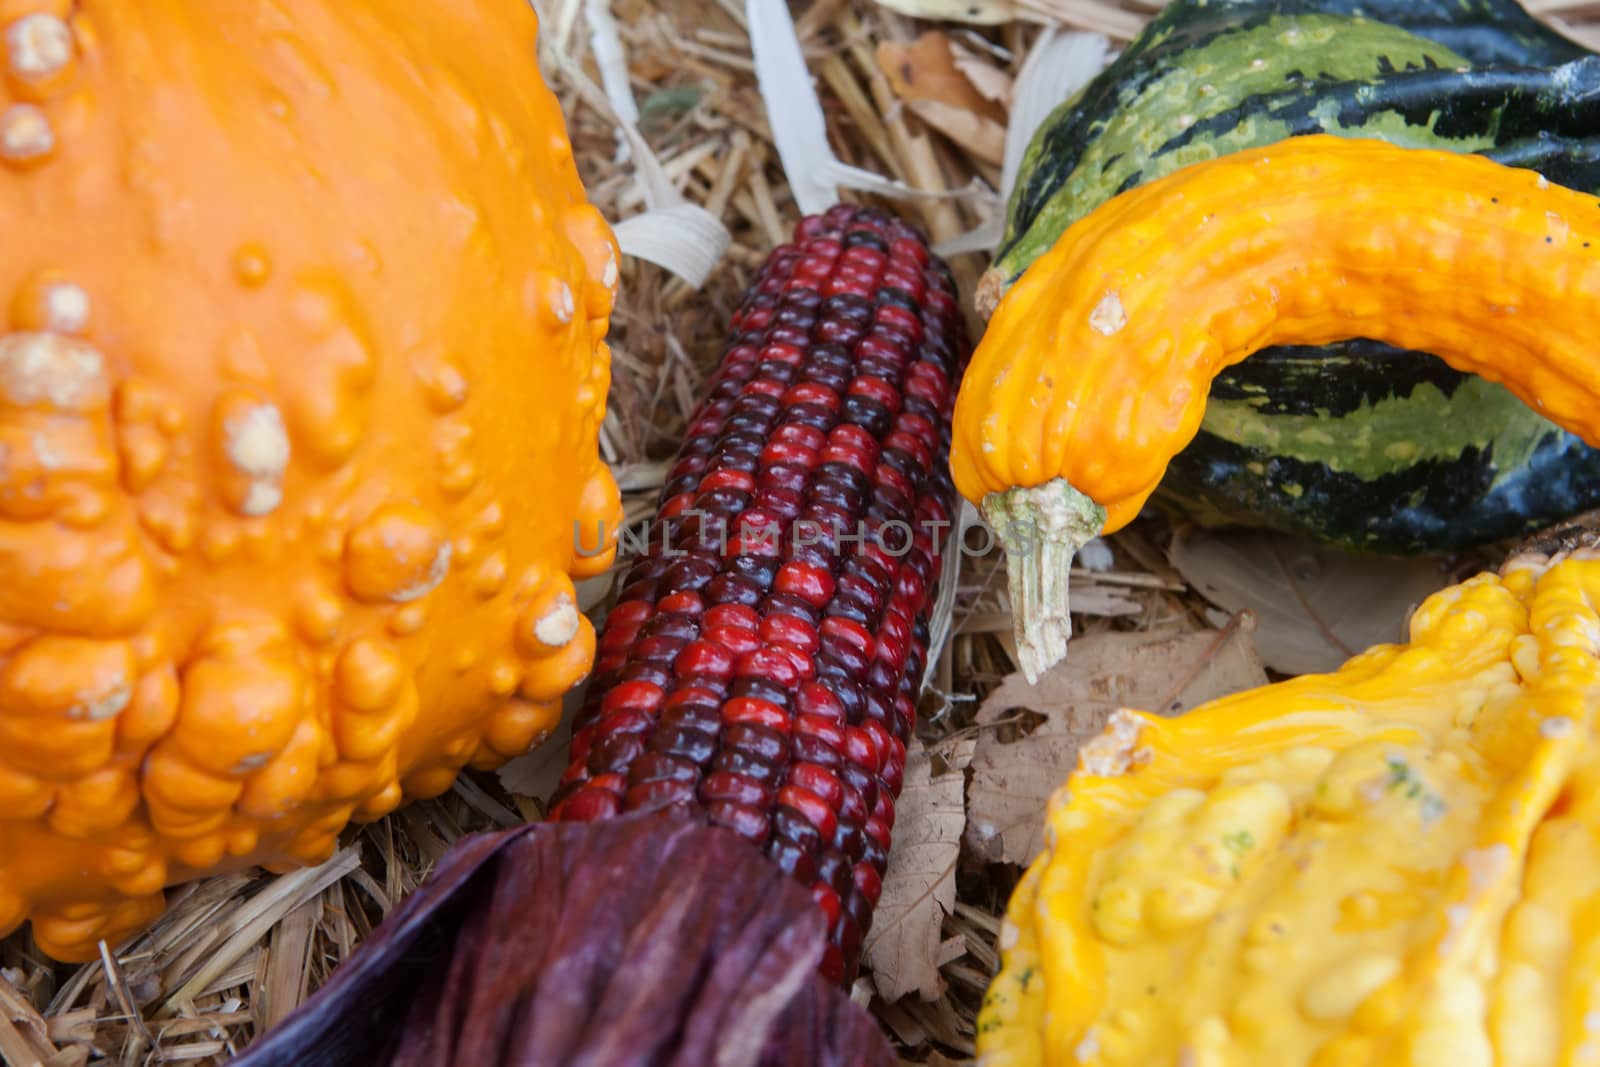 Gourds and Indian Corn during the fall season.